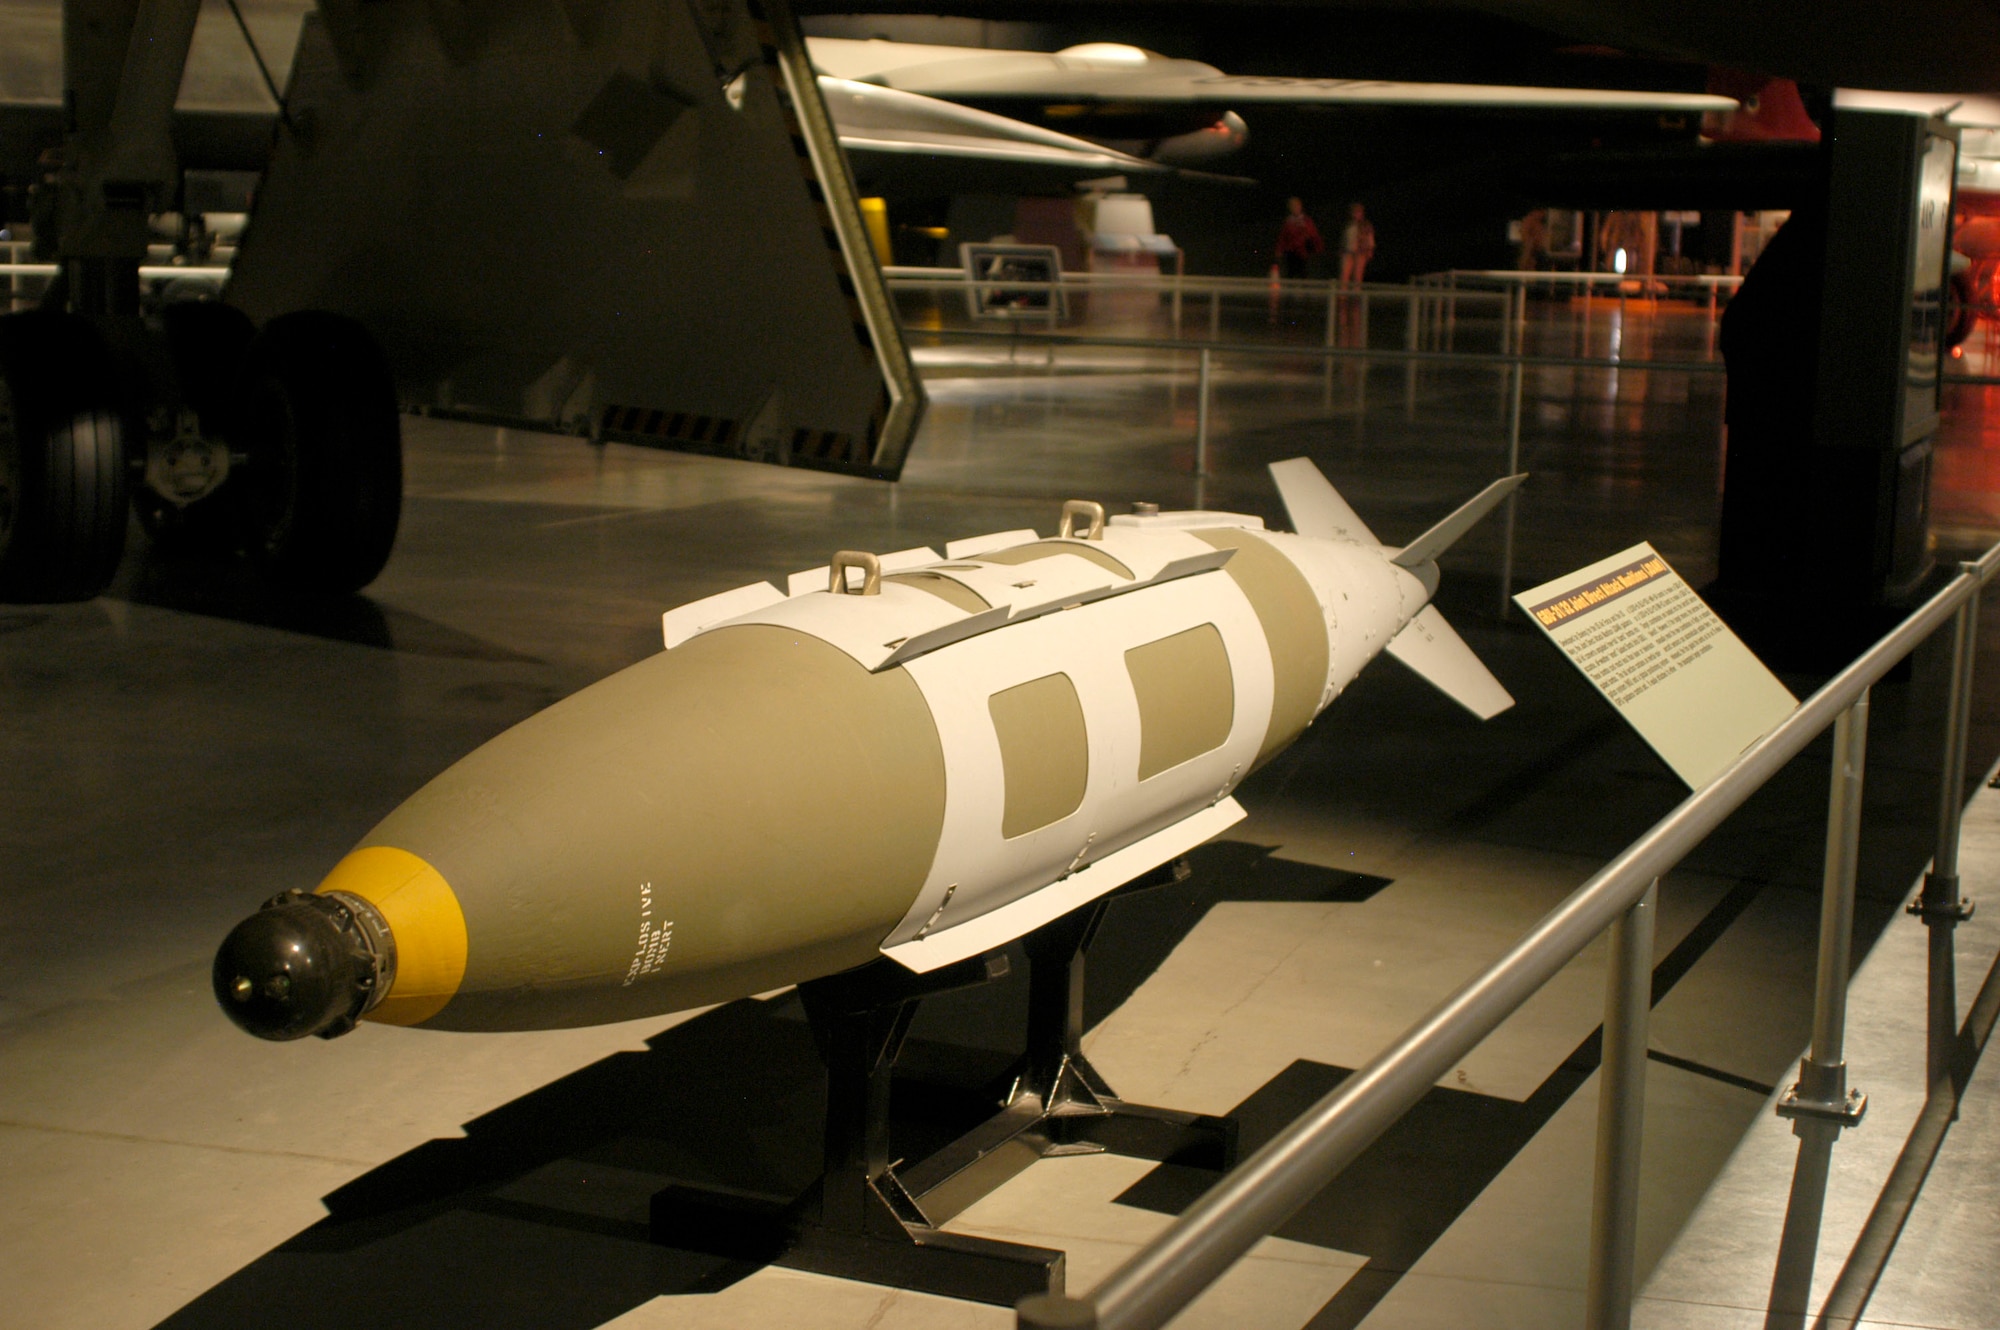 DAYTON, Ohio - The GBU-31/32 JDAM on display in the Cold War Gallery at the National Museum of the U.S. Air Force. (U.S. Air Force photo)